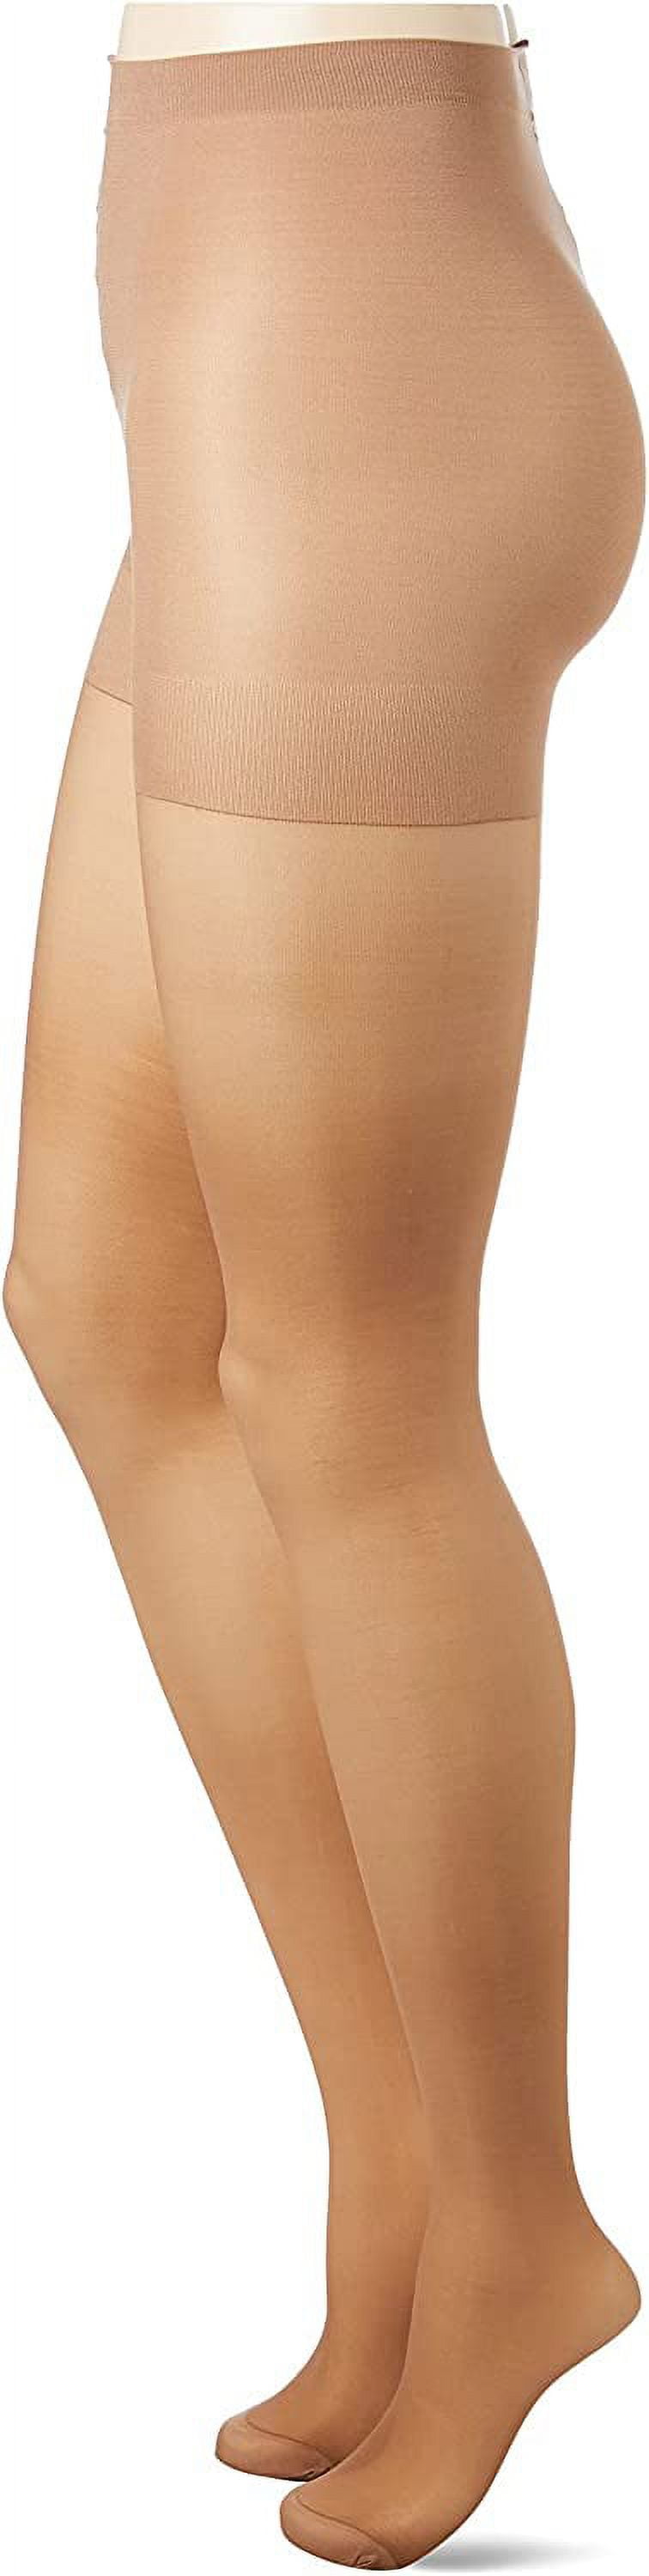 Women's Hanes C06810 Alive Full Support Control Top Pantyhose - 6 Pack  (Barely There C) 